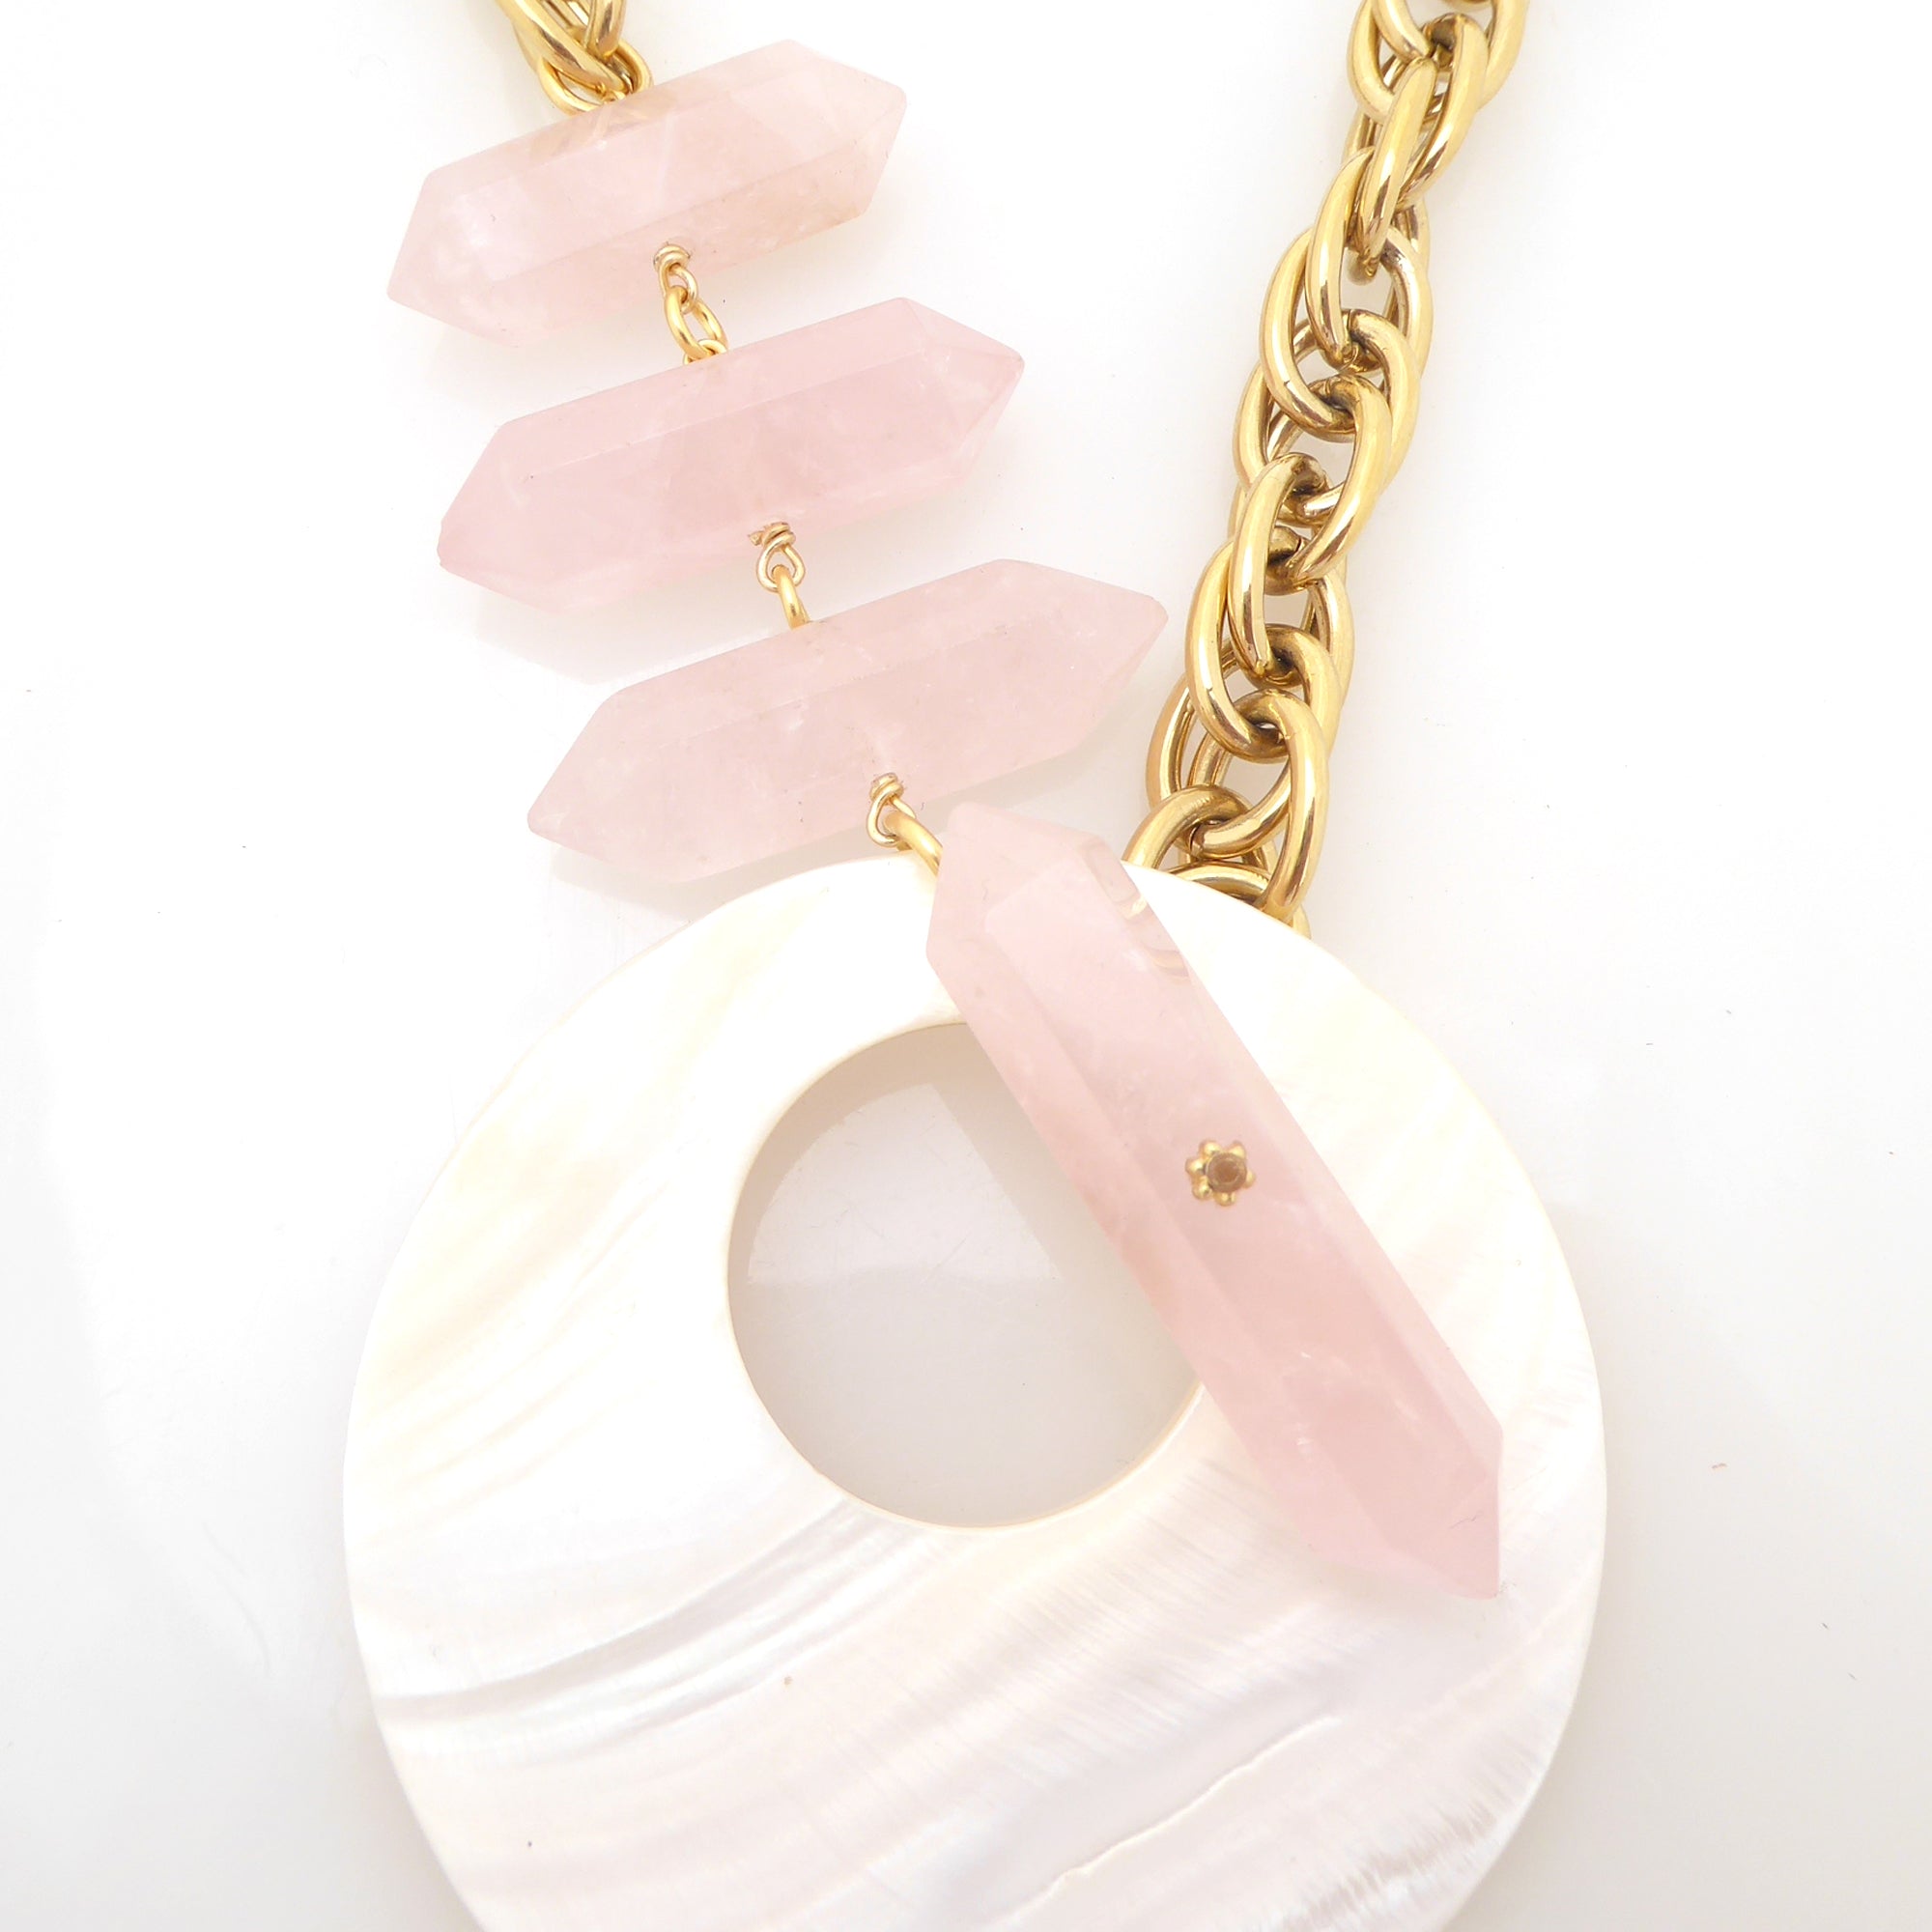 Marna rose quartz and shell necklace by Jenny Dayco 4